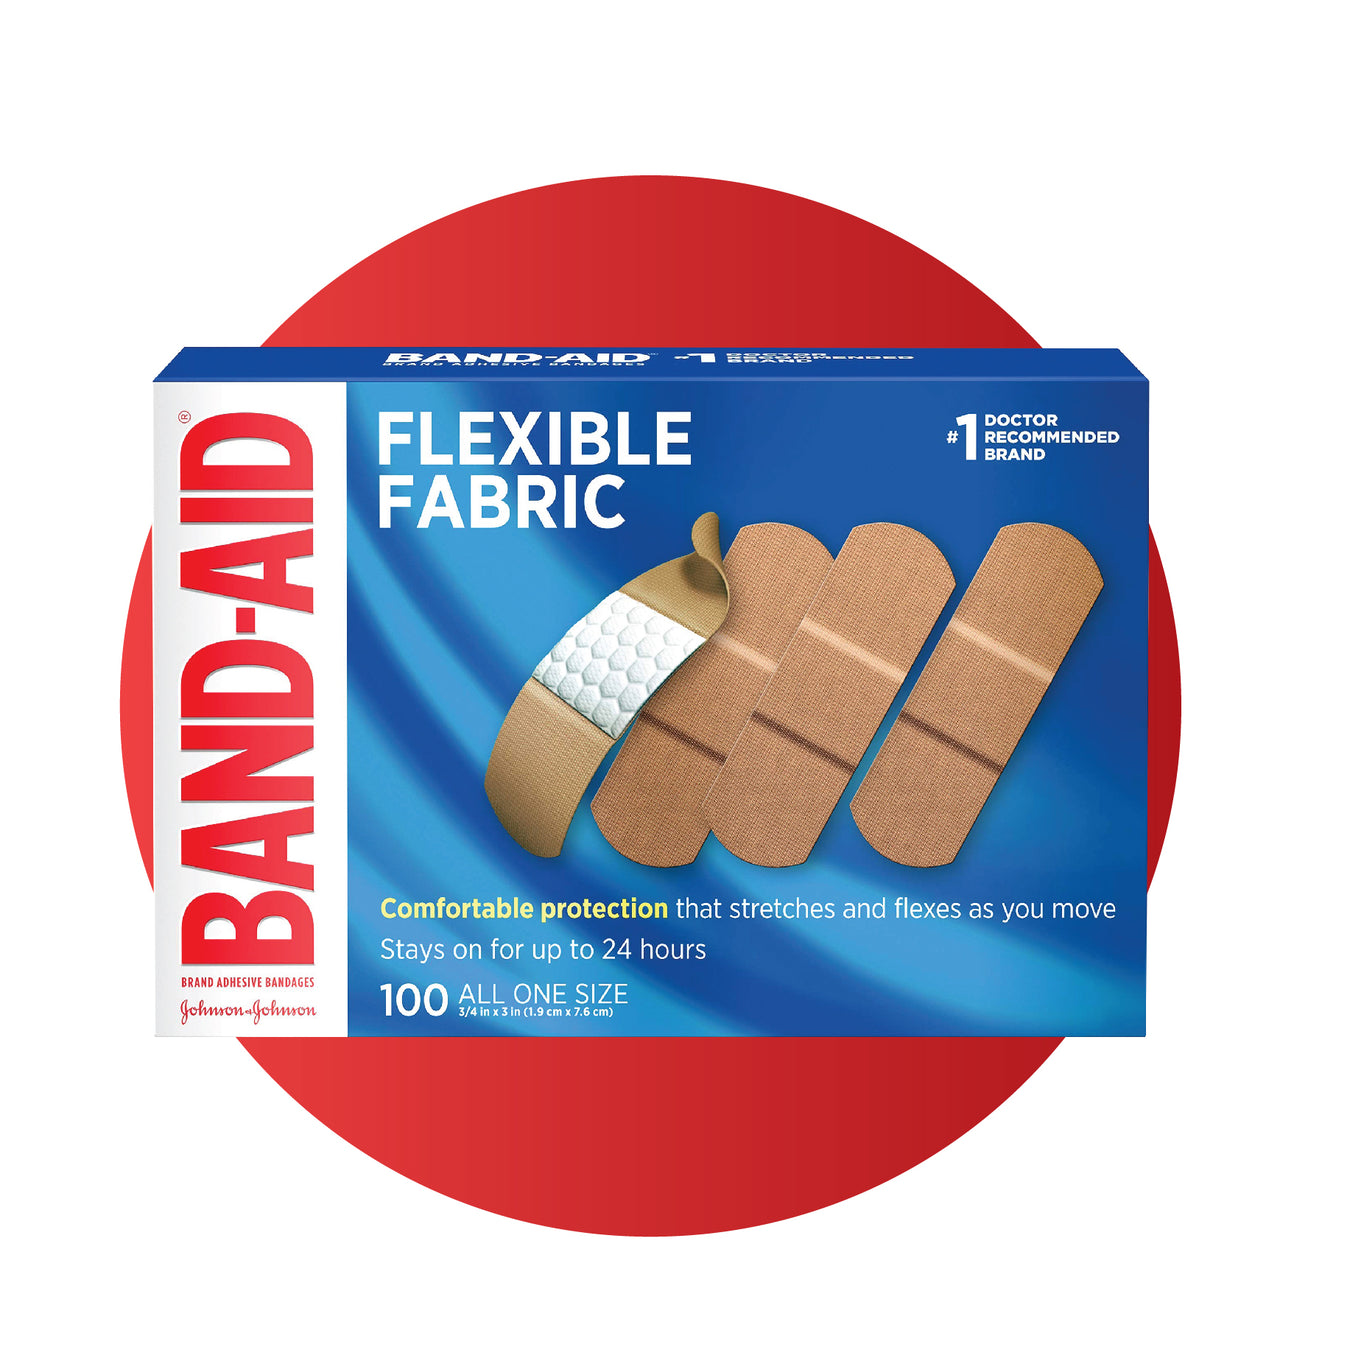 FSA & HSA Eligible – Freedom Bands For Diabetics